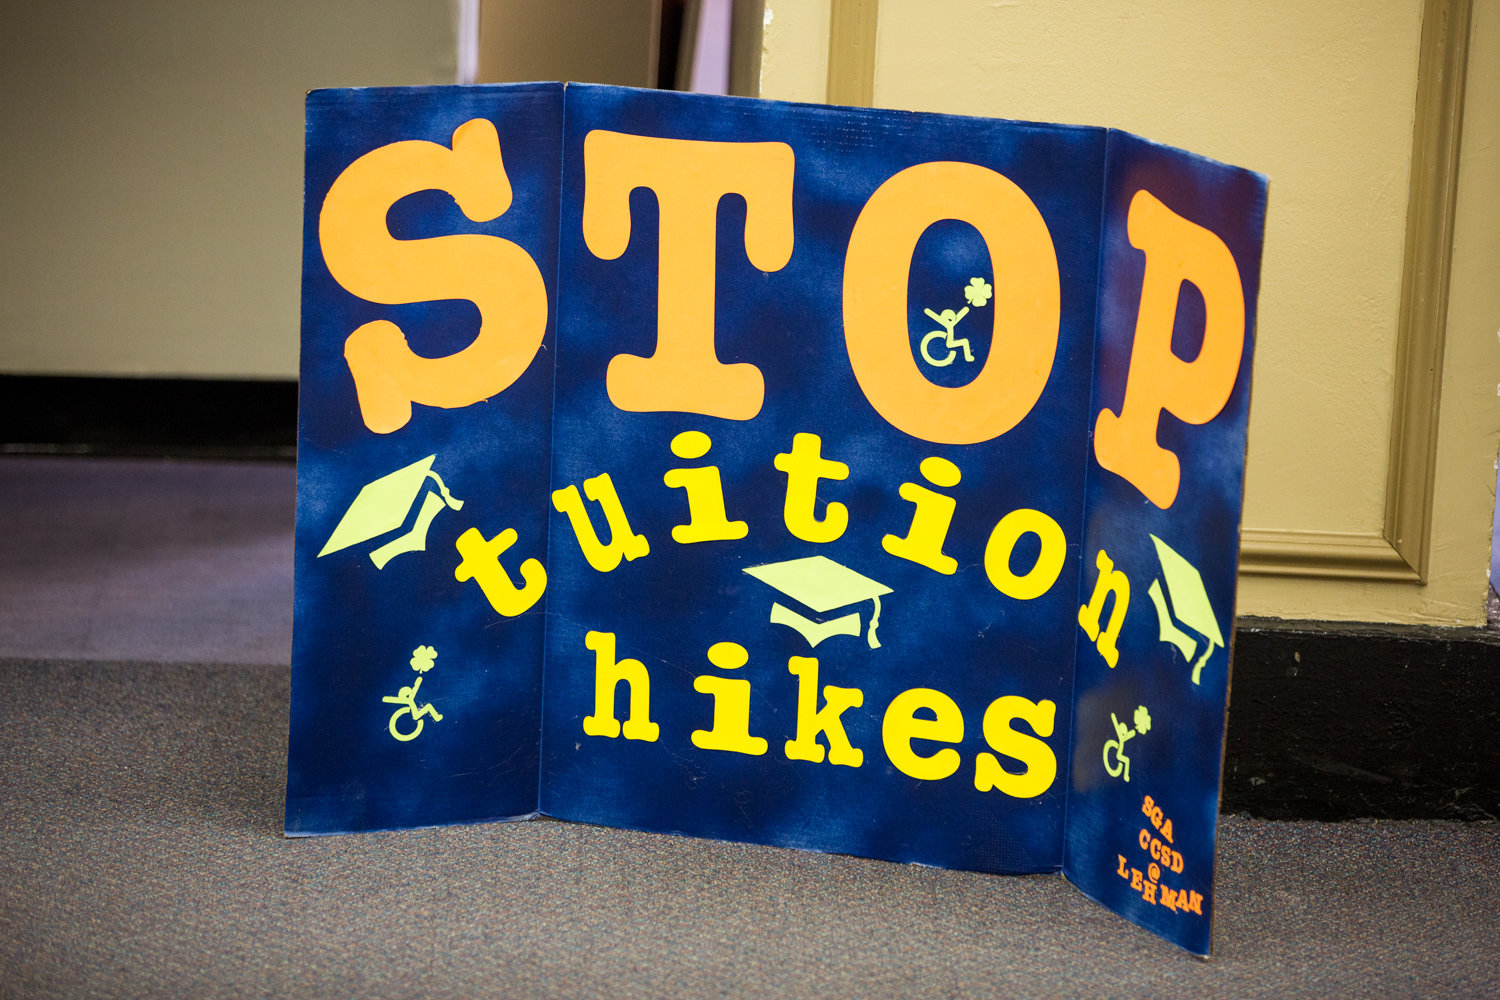 A poster that reads ‘Stop tuition hikes’ stands on the floor during a March 9 forum hosted by the CUNY Rising Alliance at Lehman College, which dealt with proposed budget cuts and tuition hikes.